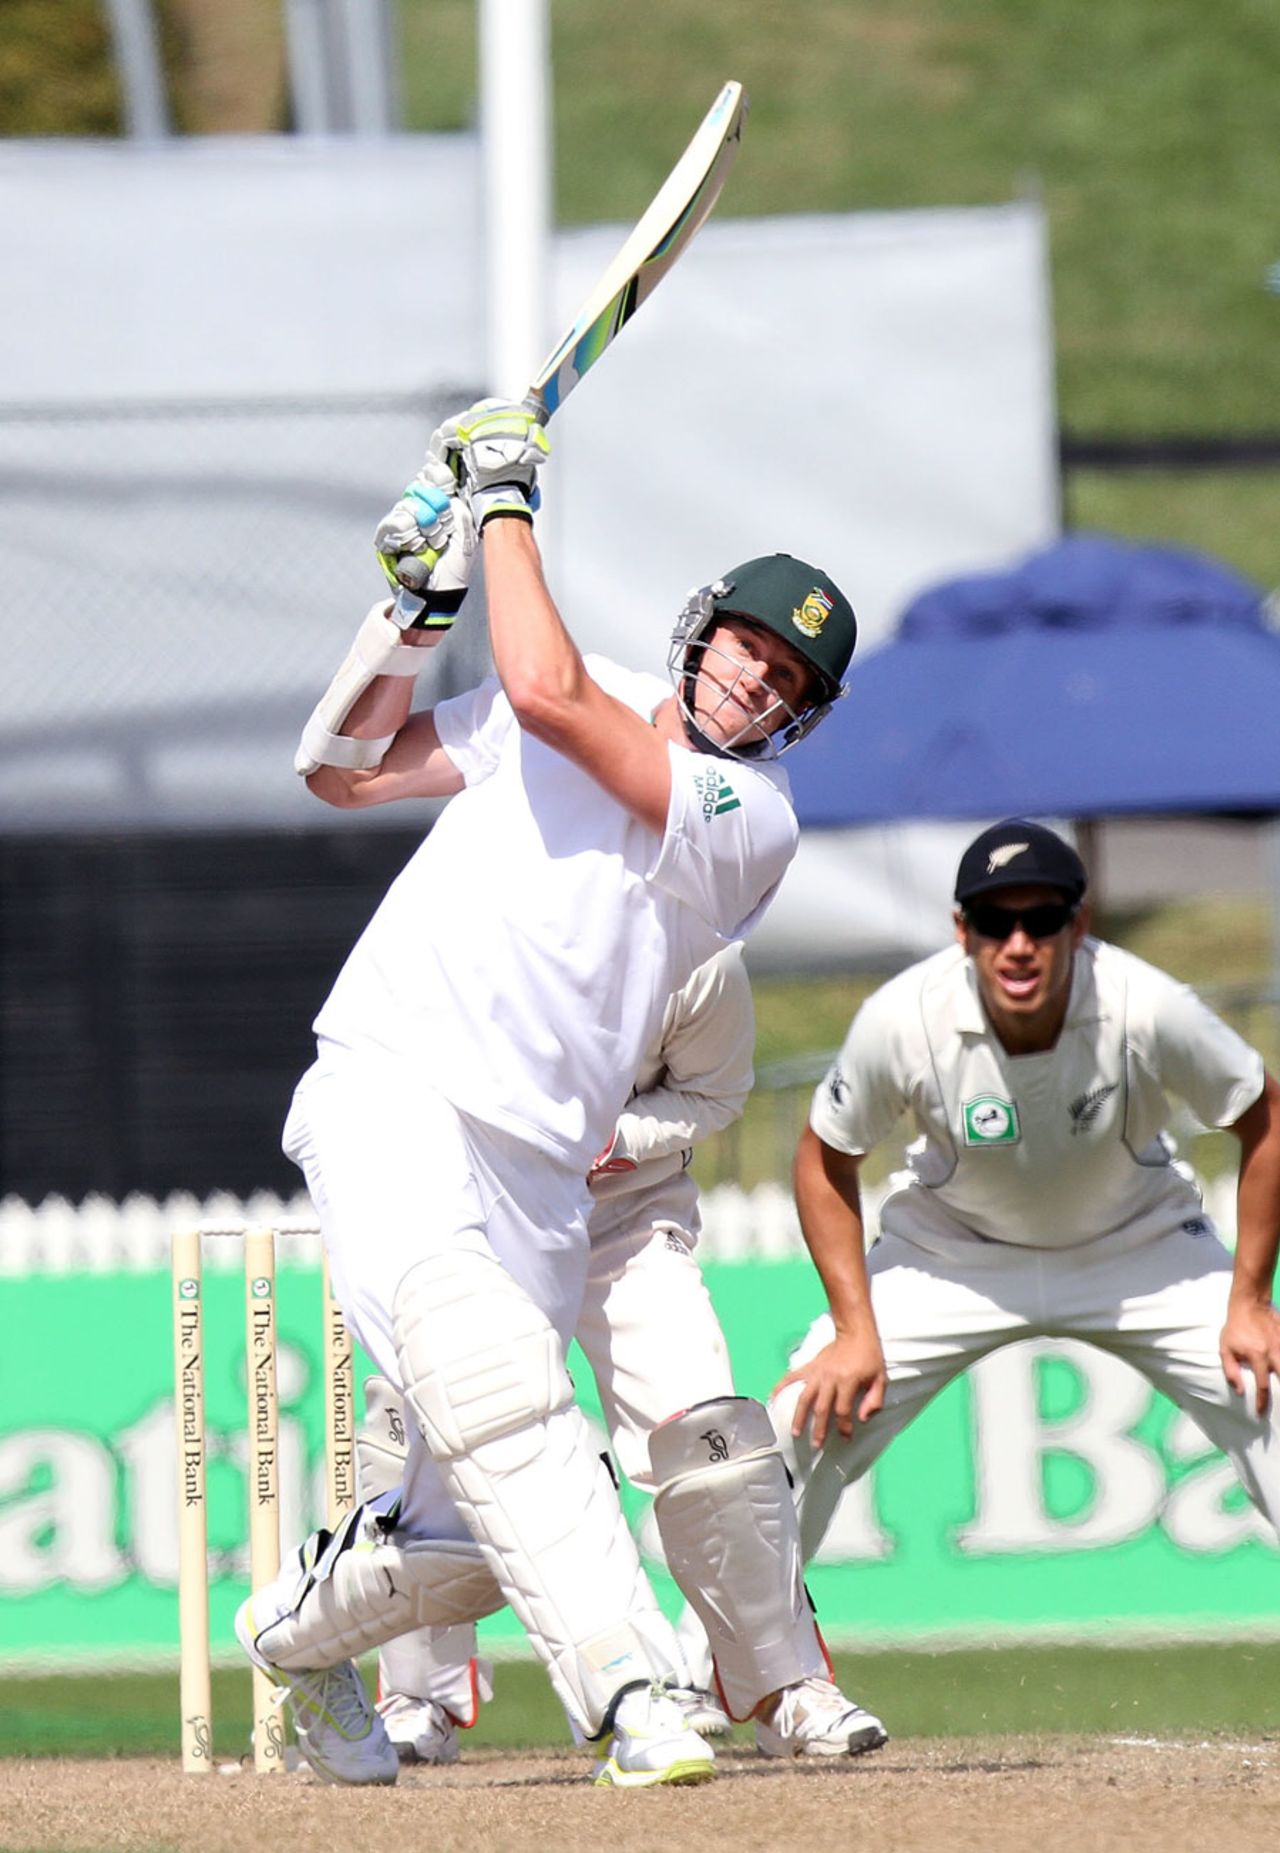 Morne Morkel contributed valuable runs down the order, New Zealand v South Africa, 2nd Test, Hamilton, 2nd day, March 16, 2012